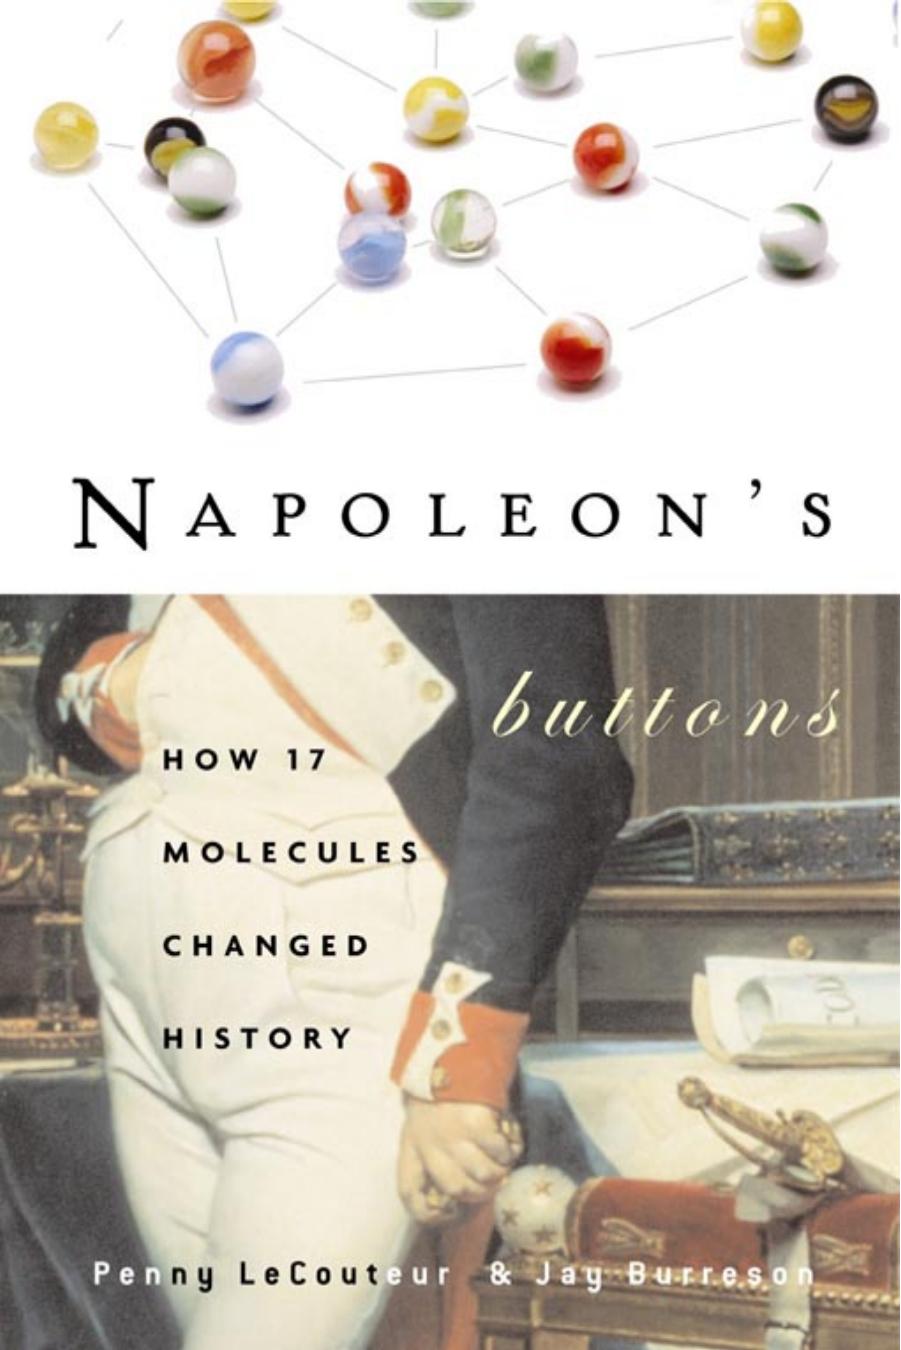 Napoleon’s Buttons: How 17 Molecules Changed History【Penny Le Couteur】.